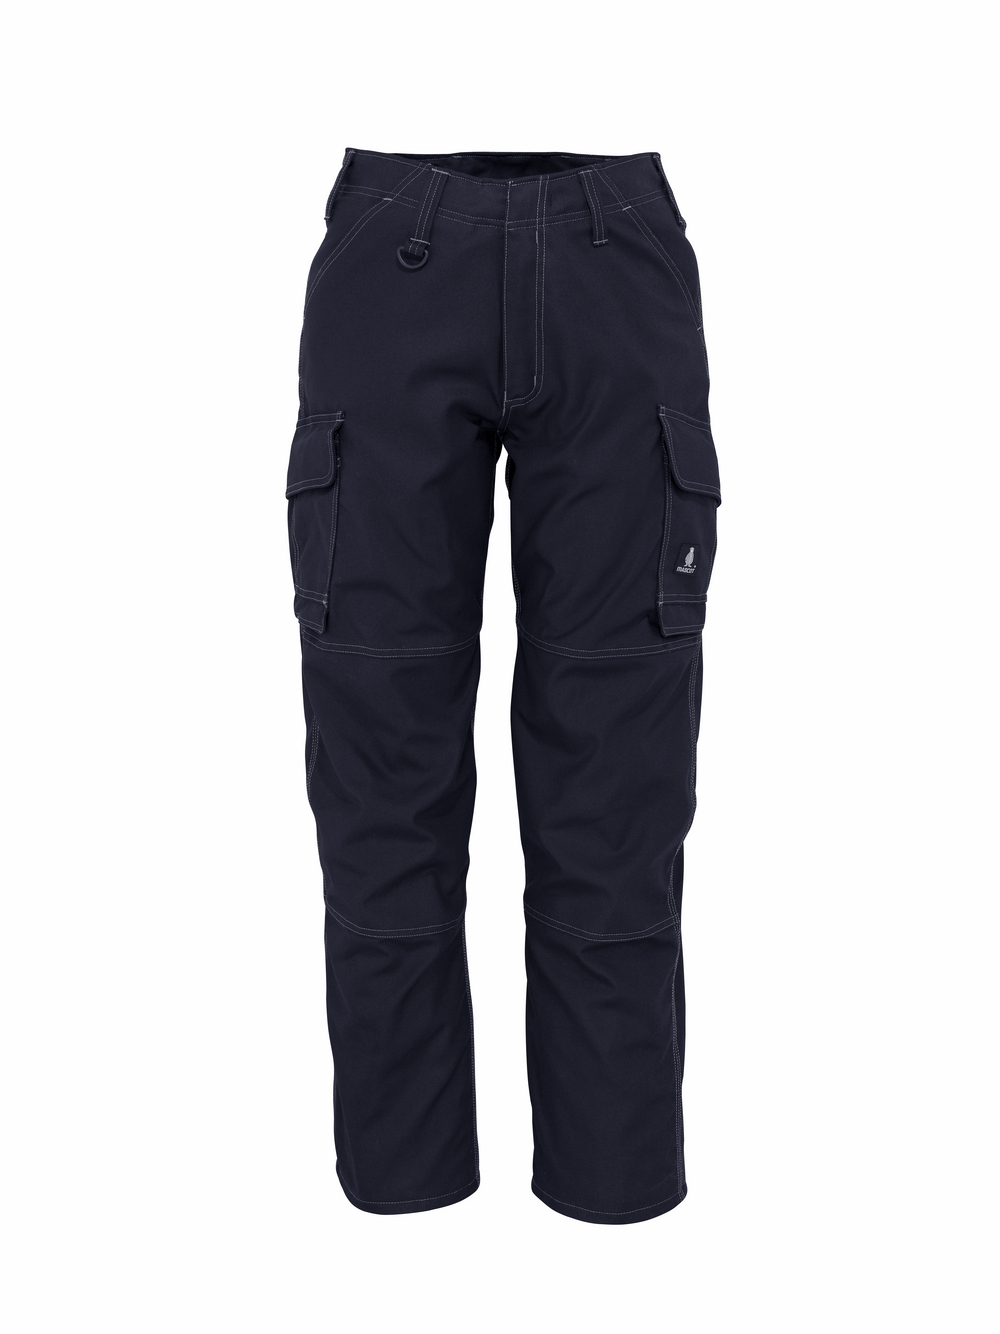 Mascot Industry Trousers with Thigh Pockets  MyWorkgear